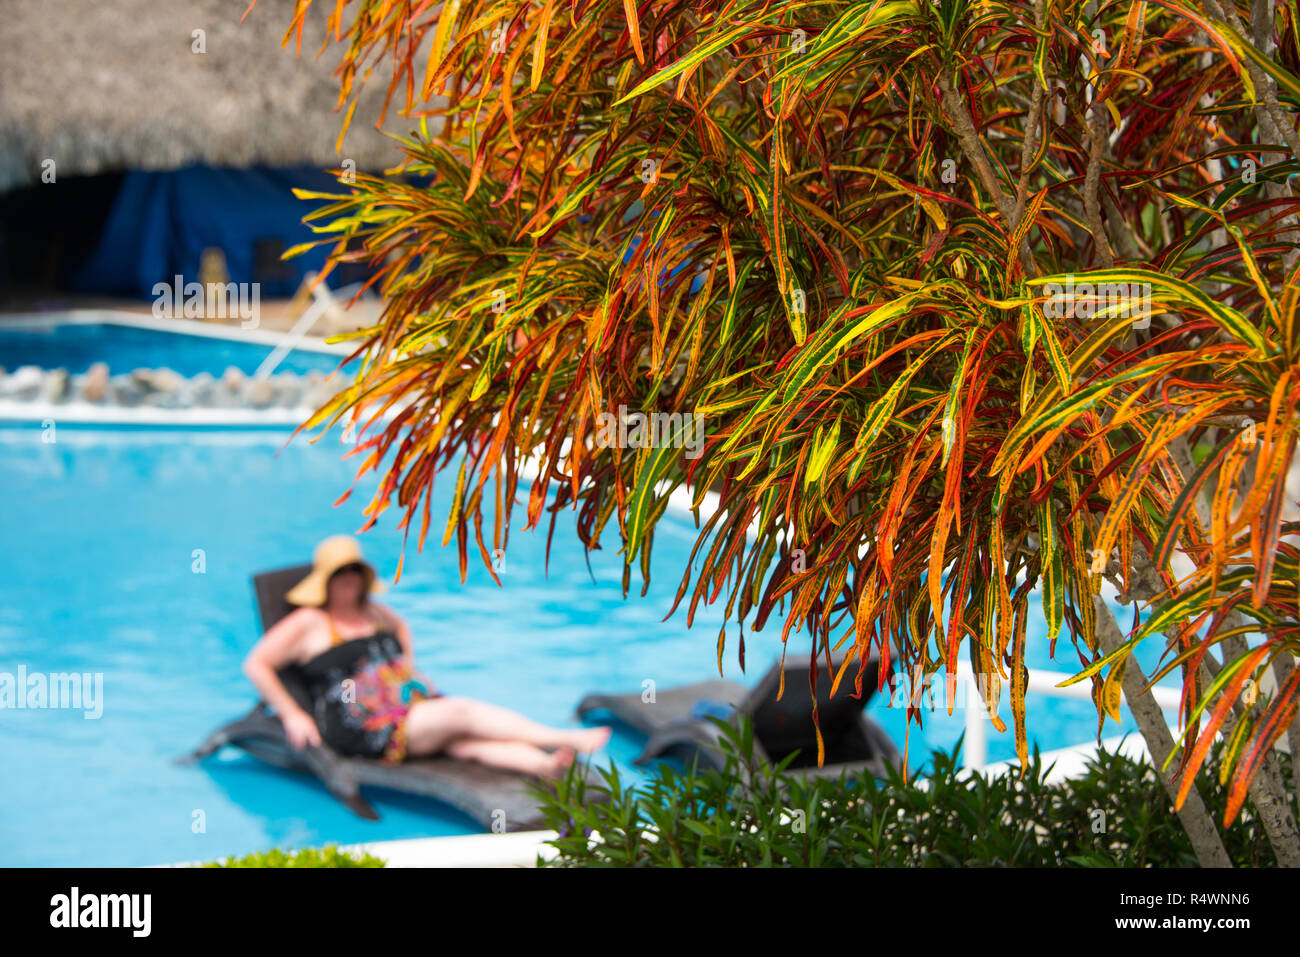 Fiery orange leaves on one of many plants in a resort garden near a pool with de-focused woman relaxing in background. Stock Photo